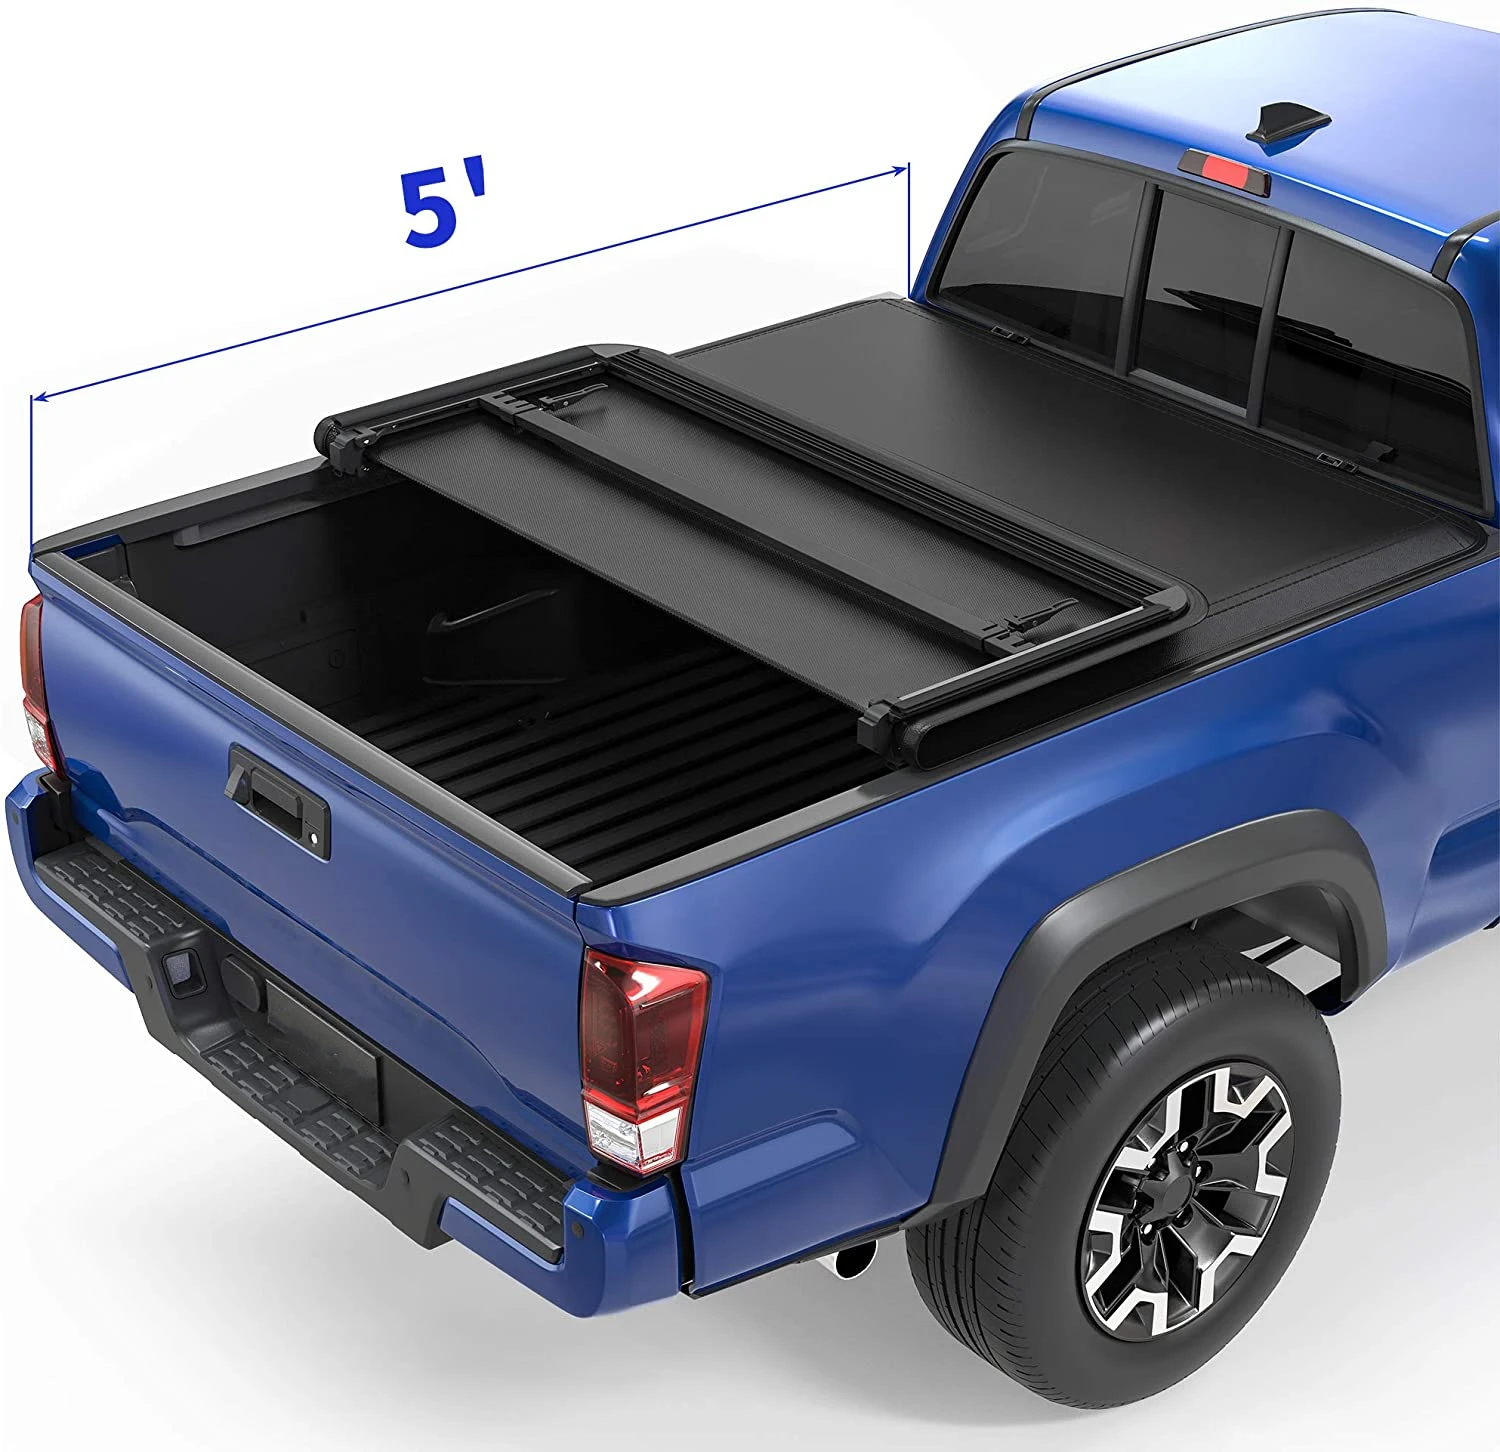 

4x4 High Quality Hard Aluminum Roll Up Bed Pickup Truck Tonneau Cover for Isuzu DMax for Nissan Navara NP300 for Toyota Hilux